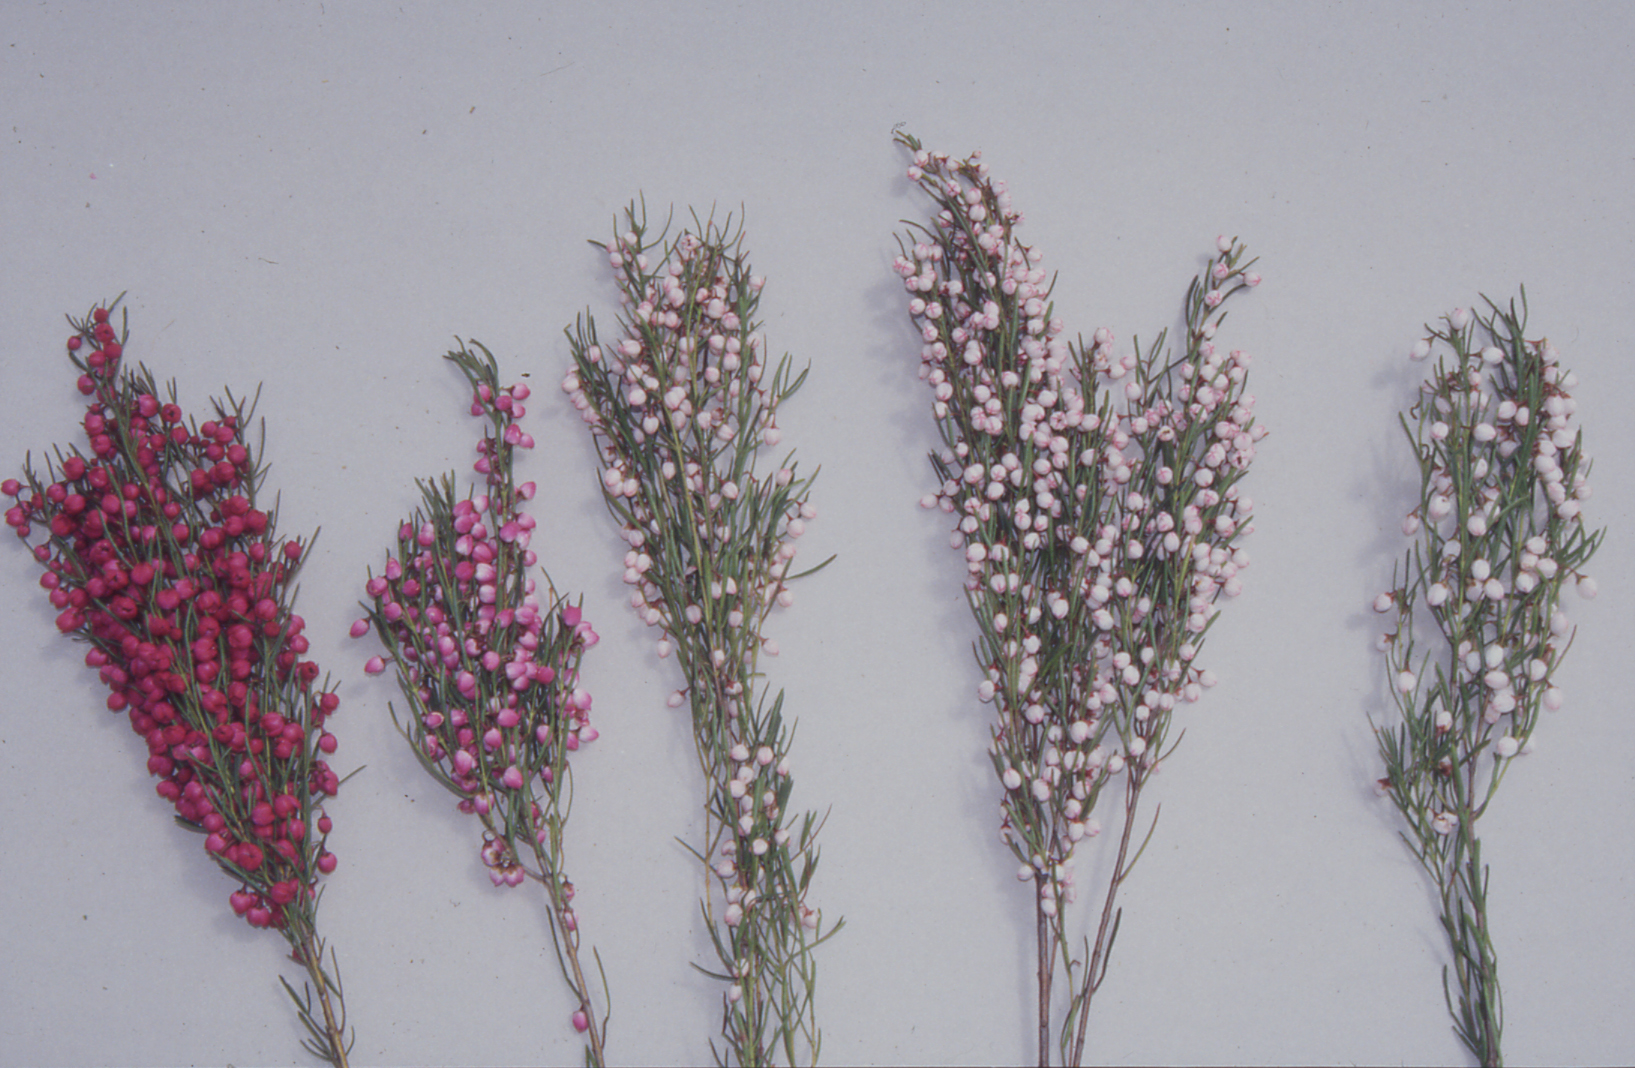 Growing boronia in Western Australia | Agriculture Food